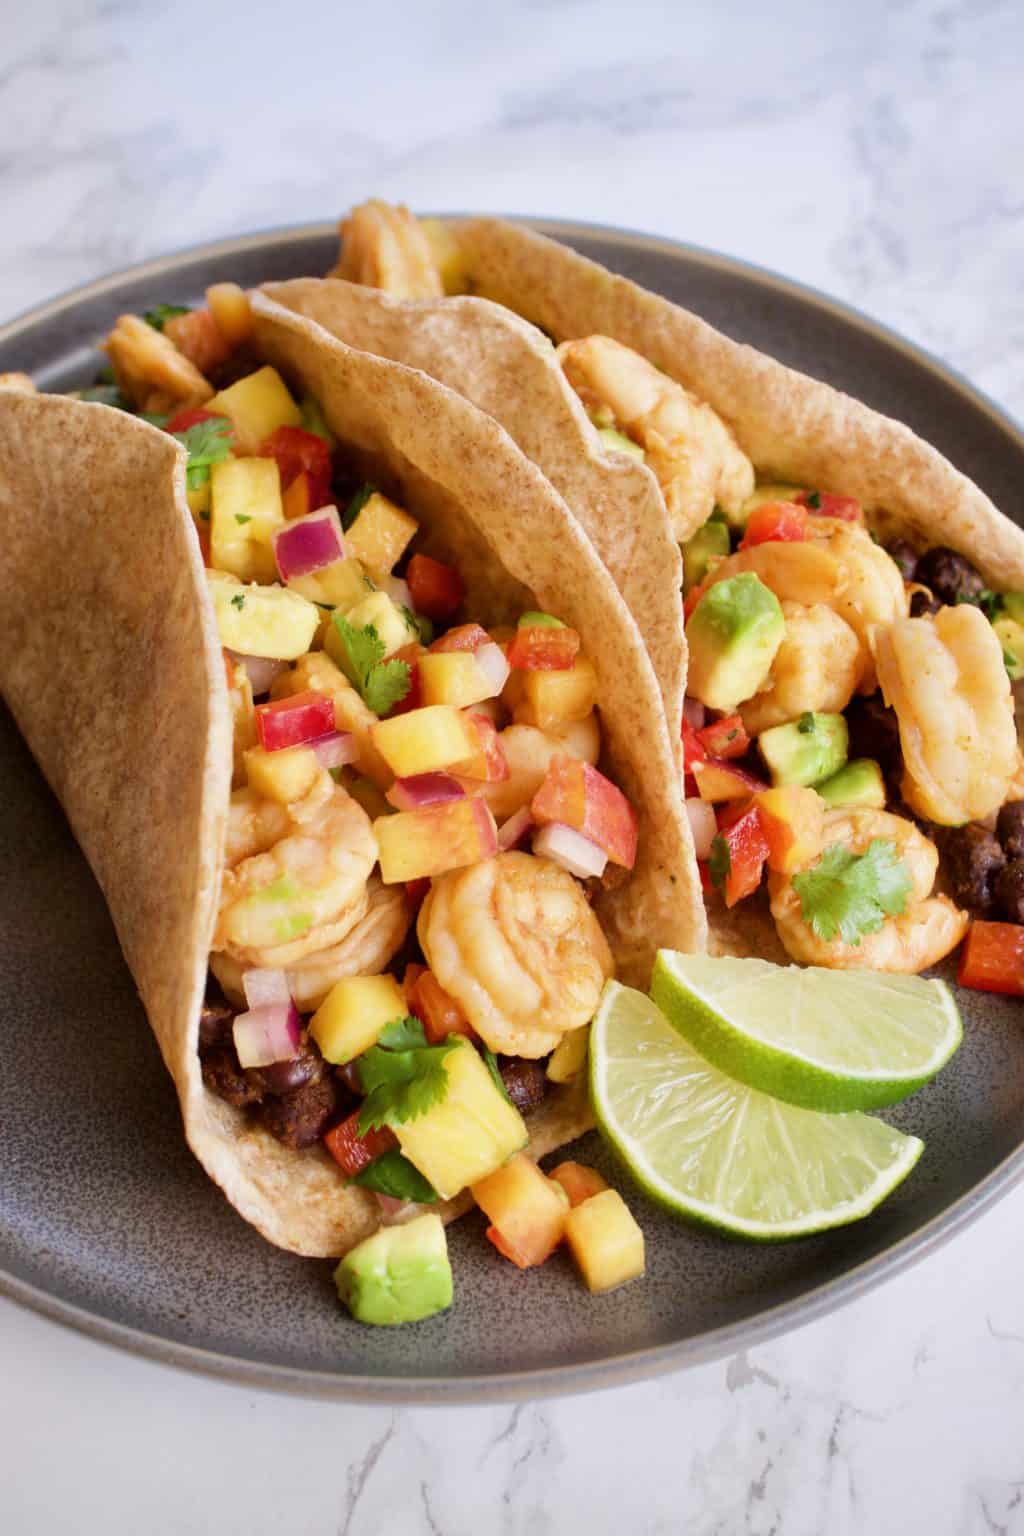 Chipotle Lime Shrimp Tacos with Pineapple Peach Salsa - Yummy Noises